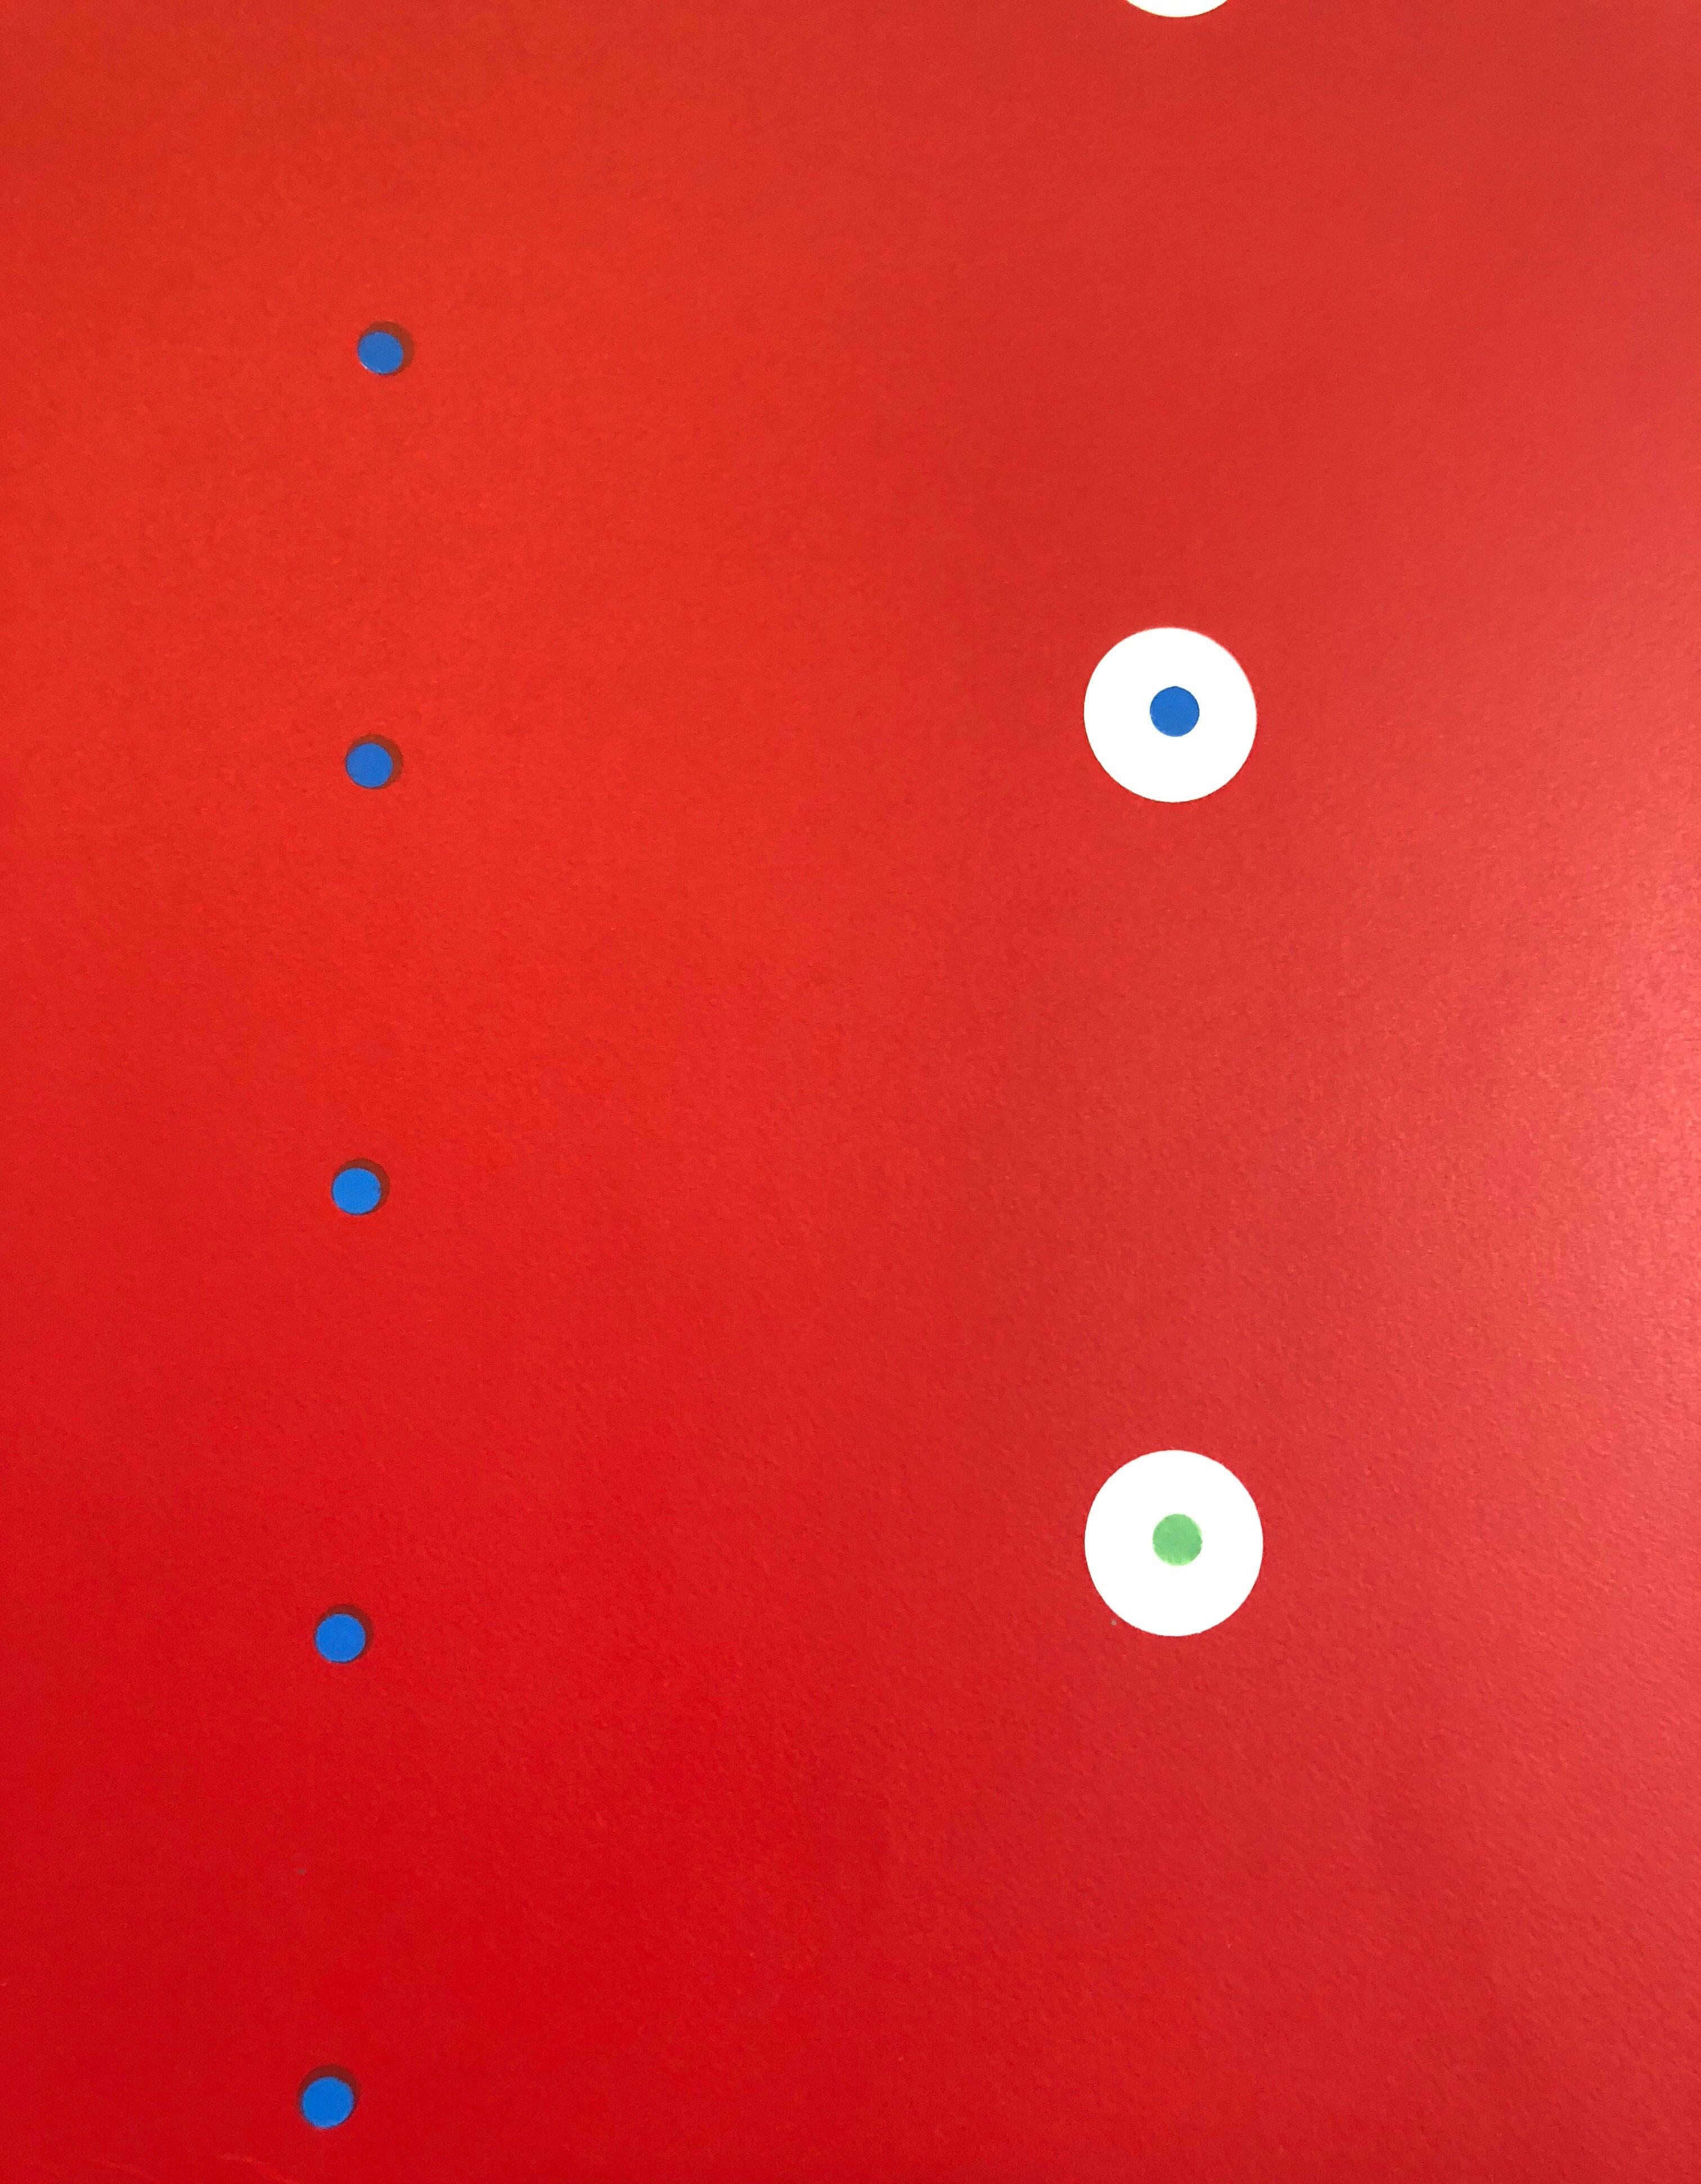 Rare print from small edition of 14. Hand signed, titled and dated verso. 
It has a grid with a dot pattern on a bold red background and is titled Blue Green. 
I do not know much on the artist but he has been sold with Ilya Bolotowsky. This might